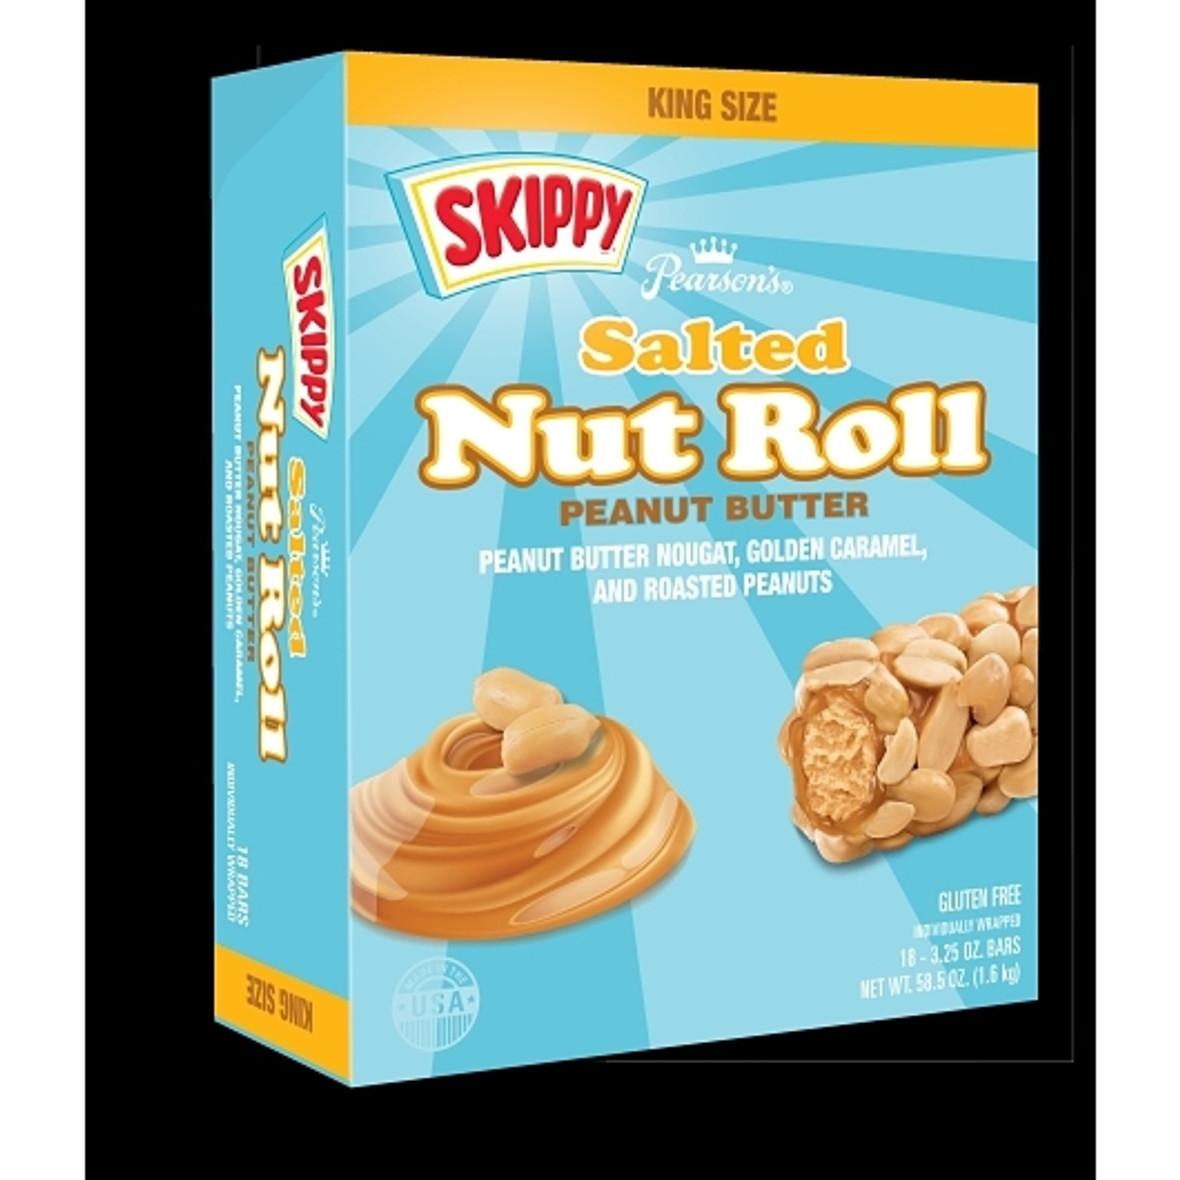 Salted Nut Roll - Skippy King Size Salted Peanut Butter, 3.25 Ounce, 18 Per Box, 8 Per Case